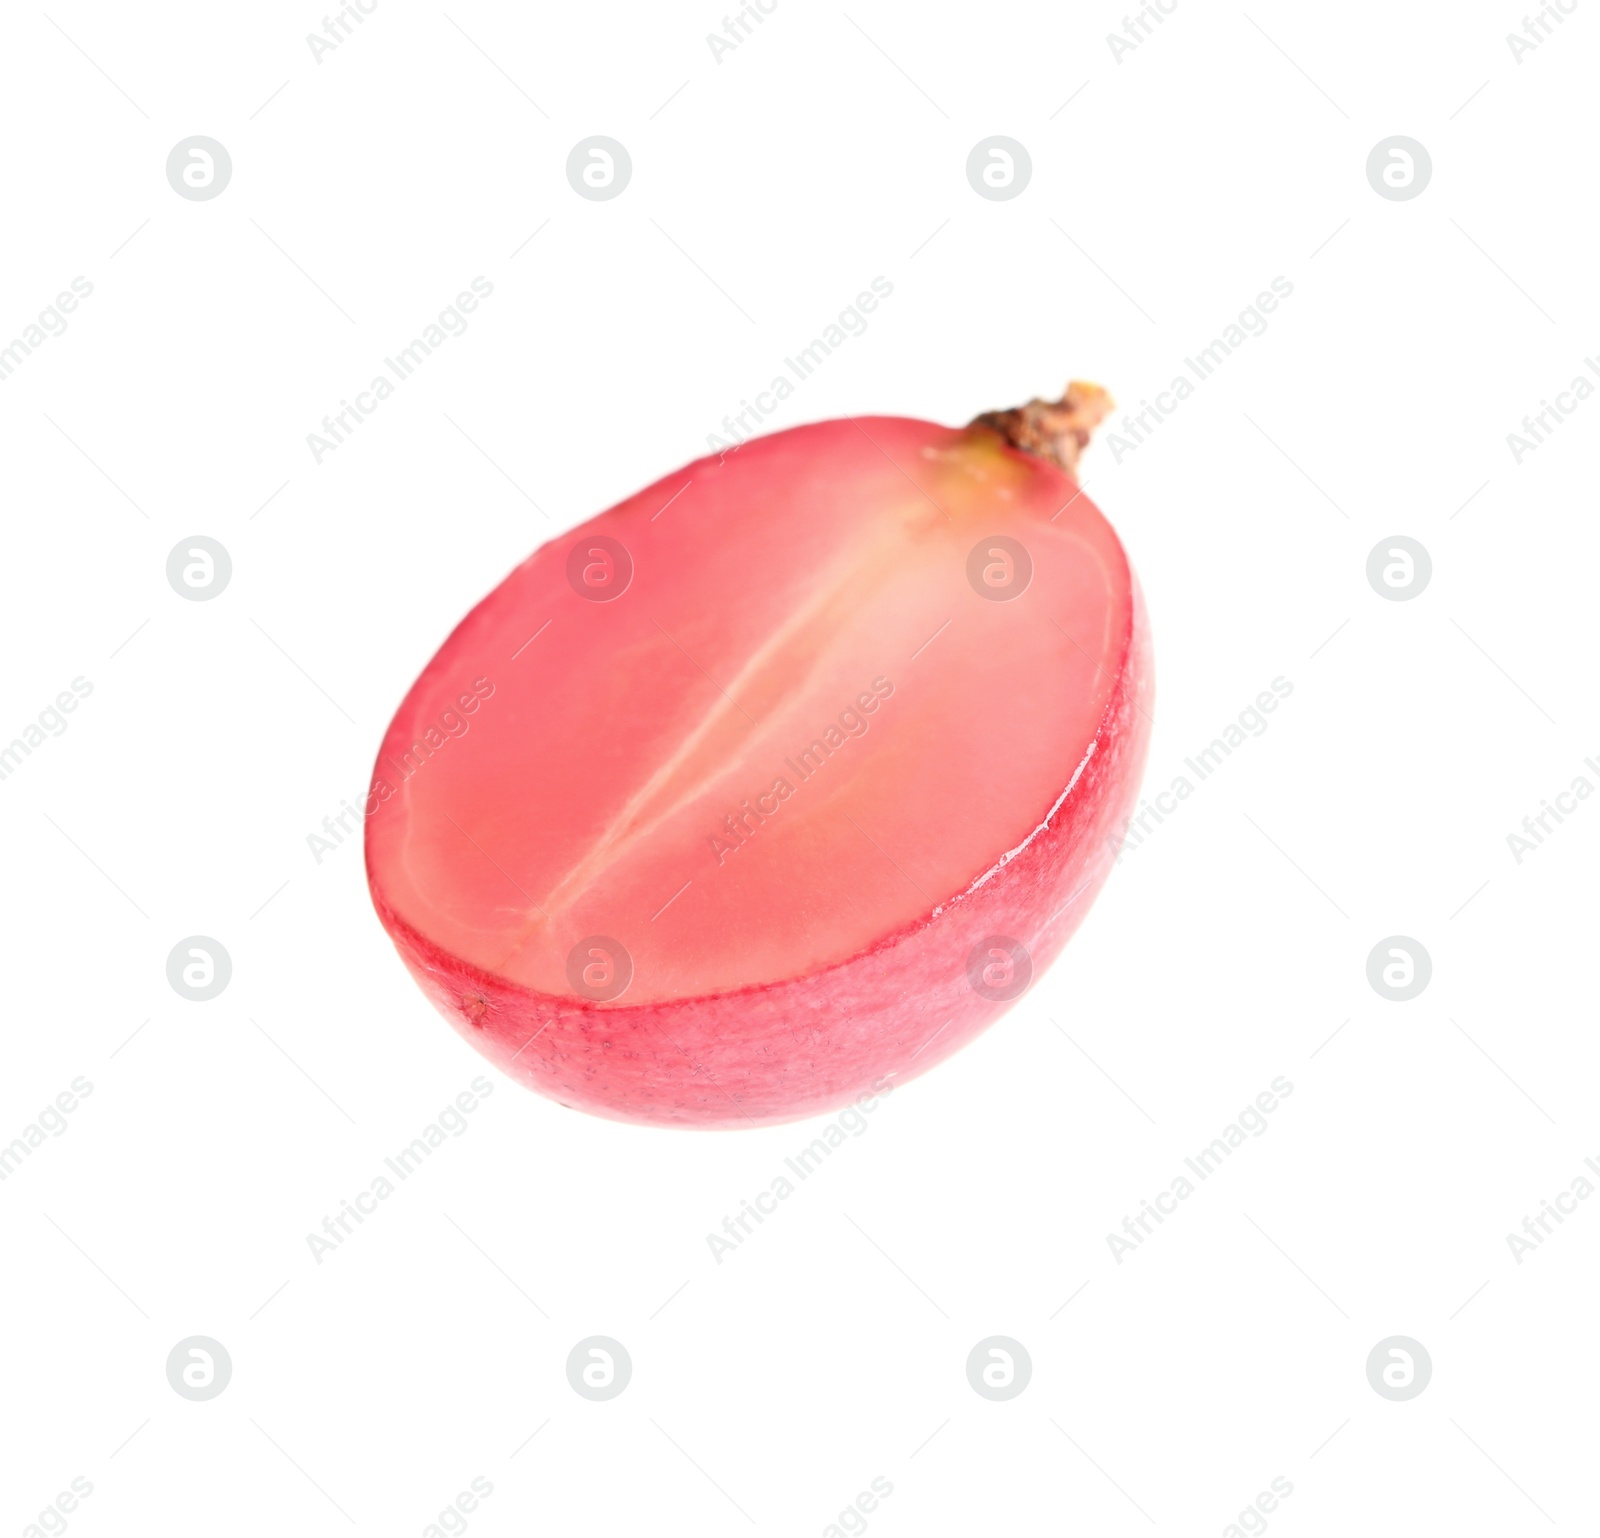 Photo of Half of delicious ripe red grape isolated on white